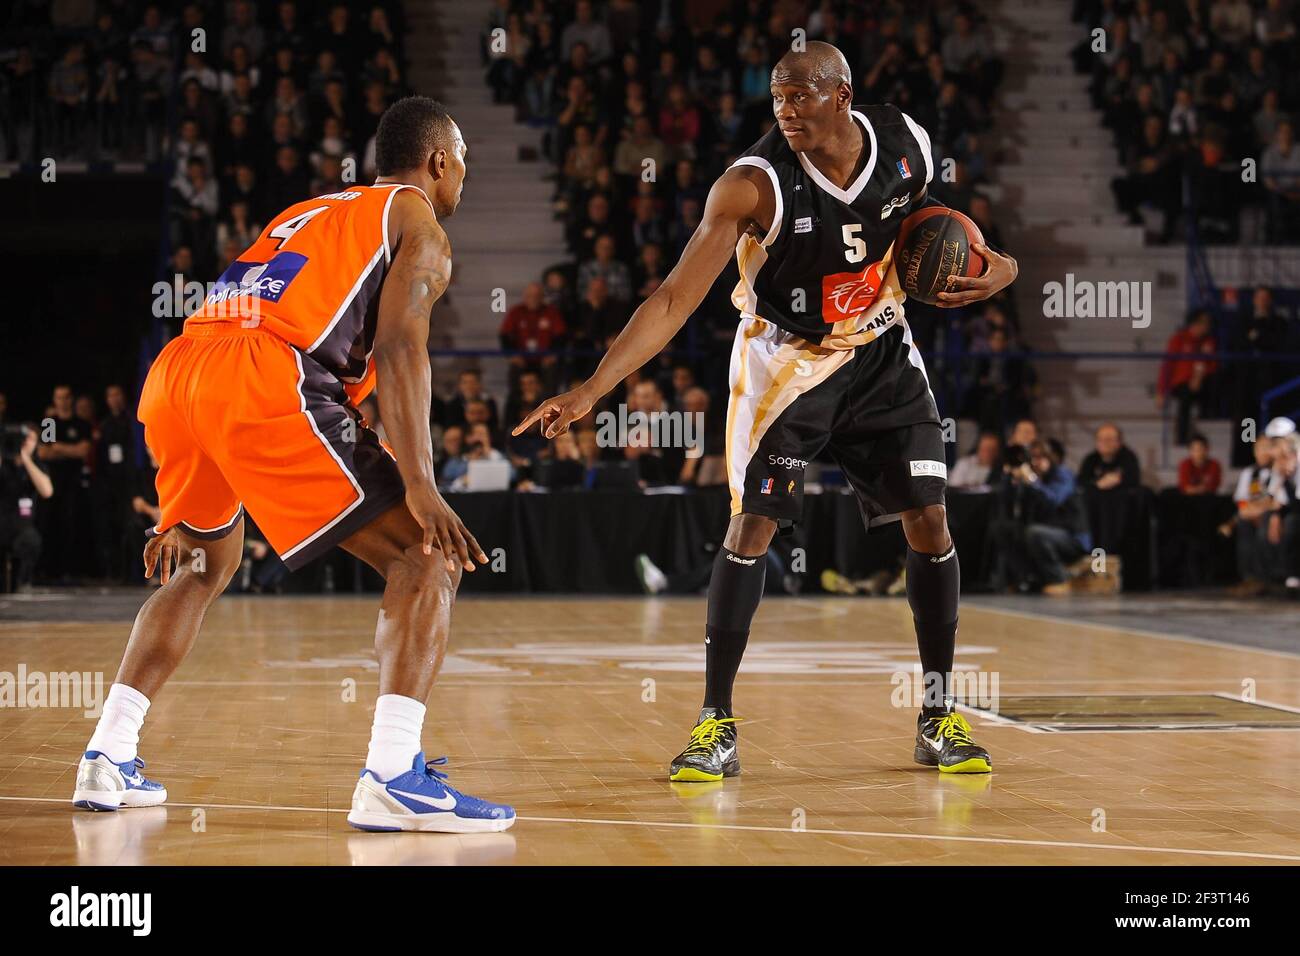 BASKETBALL - SEMAINE DES AS 2012 - ROANNE (FRA) - 1/4 FINAL - LE MANS v  ORLEANS - 16/02/2012 - PHOTO : PASCAL ALLEE / HOT SPORTS / DPPI - AMARA SY  (ORLEANS) / MARCELLUS SOMMERVILLE (MSB Stock Photo - Alamy